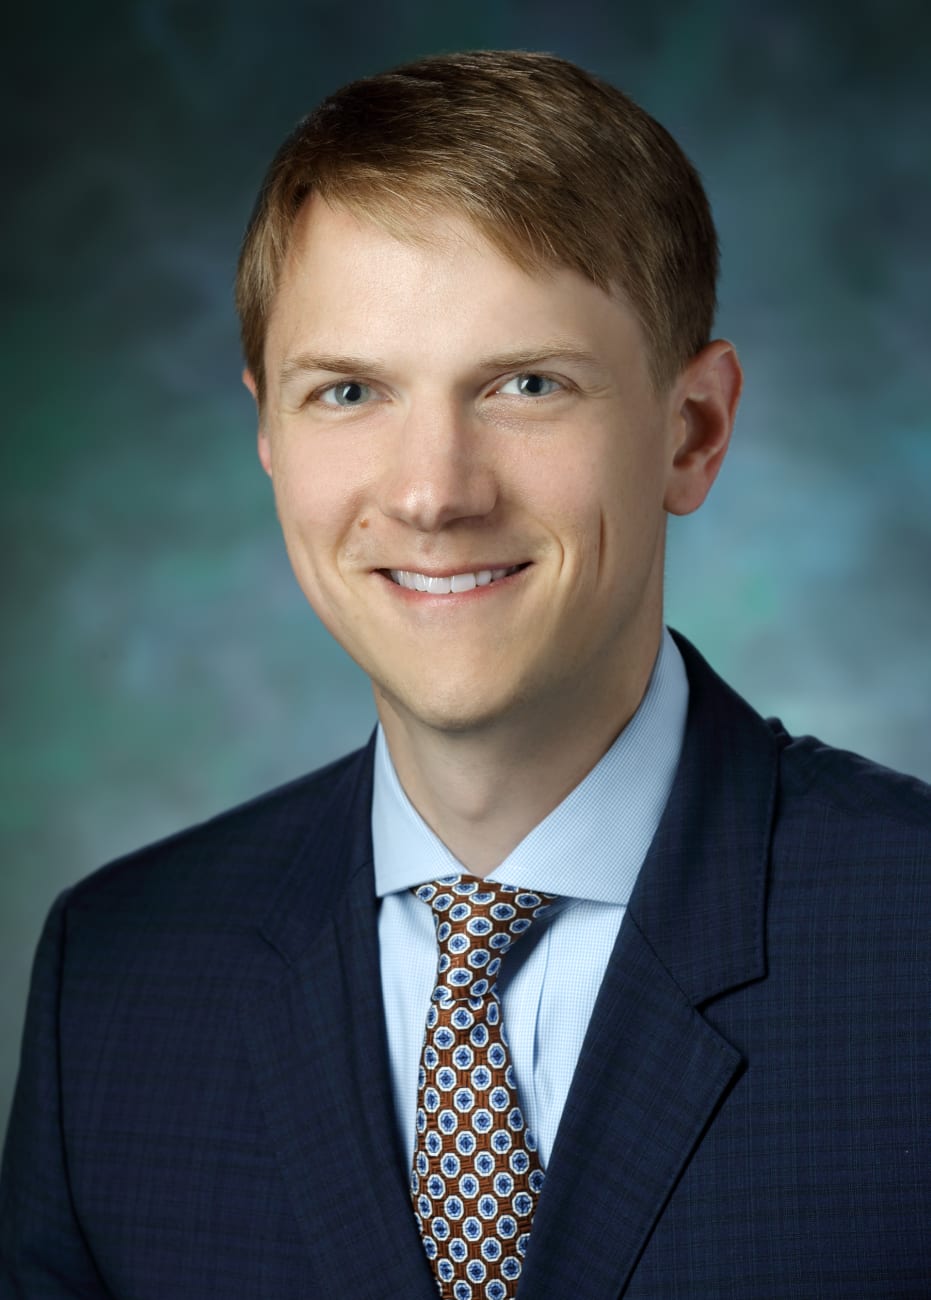 Kelly Mills, in a formal portrait, wearing a dark blue suit, light blue button down shirt and blue tie